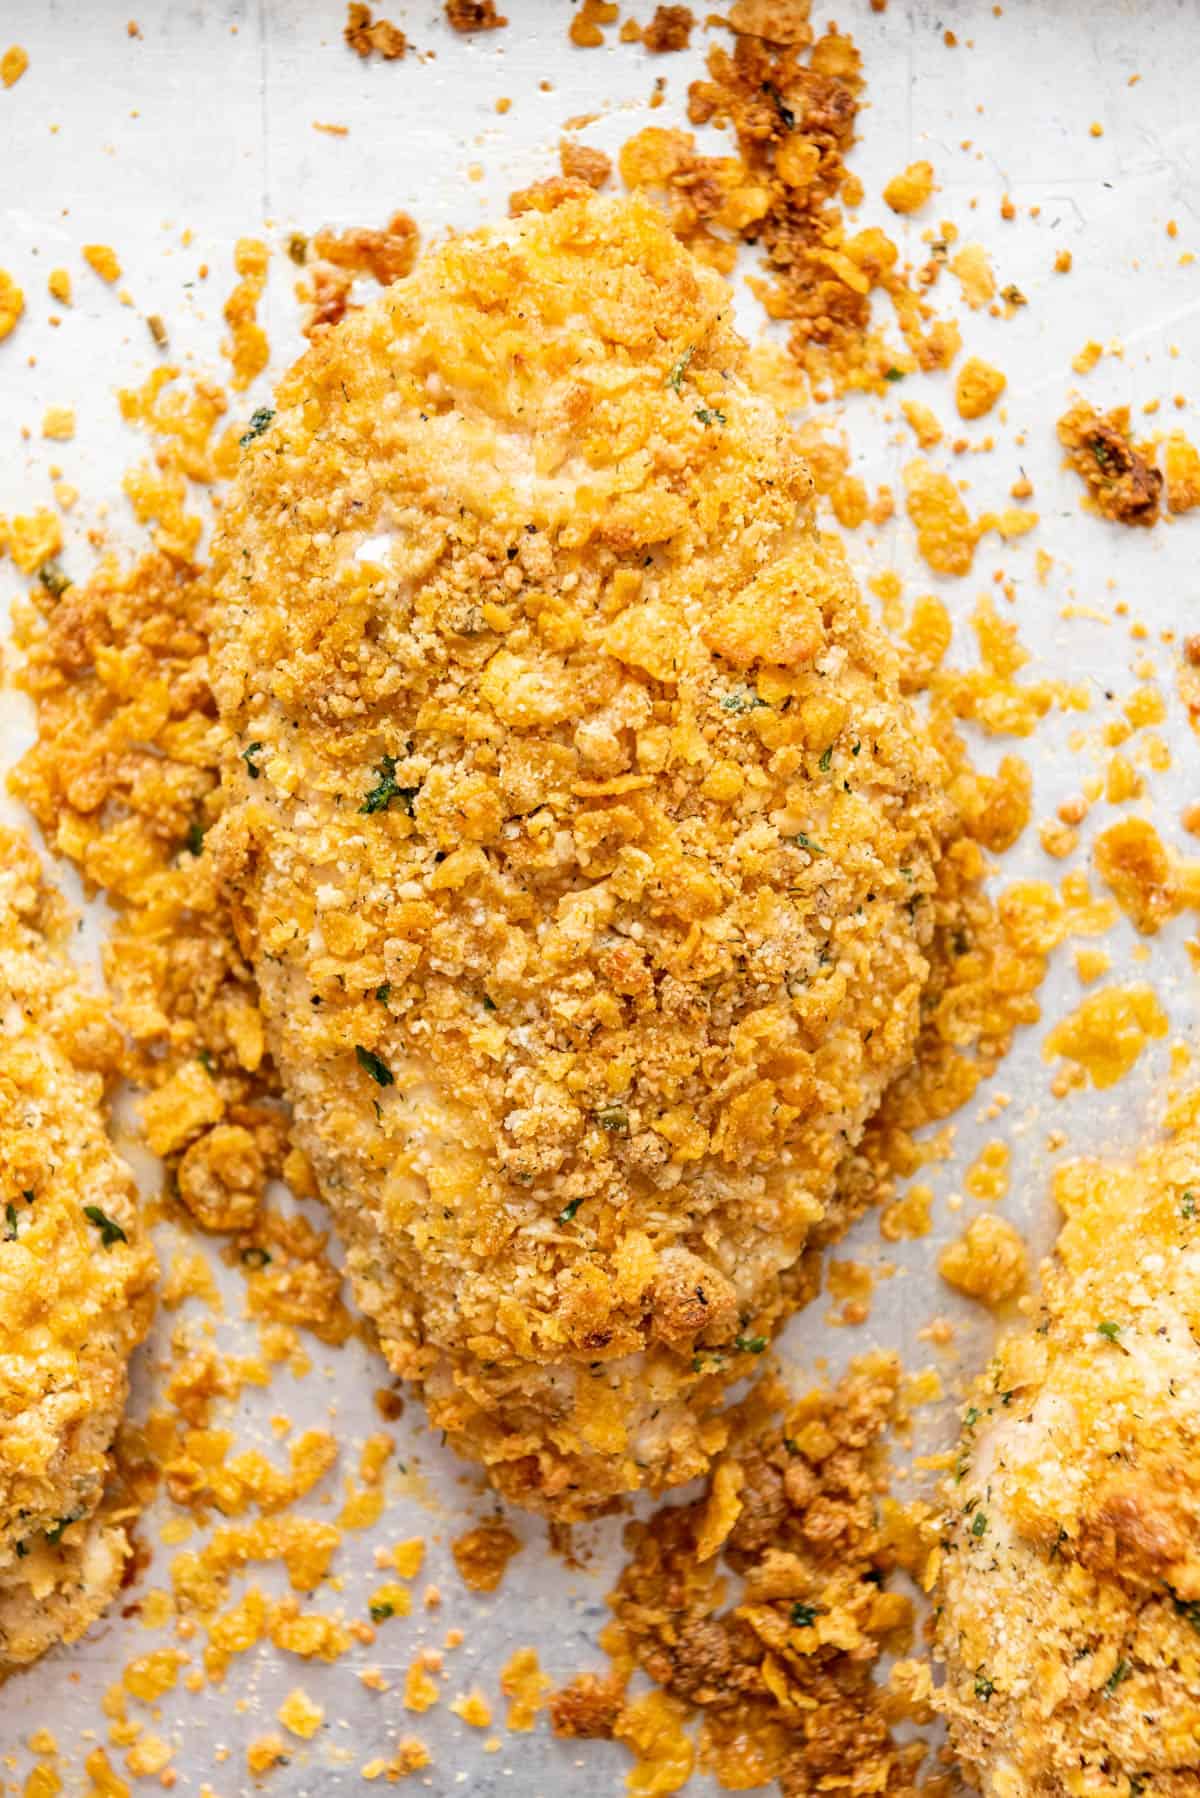 A close image of a piece of baked chicken with ranch seasoning and cornflake breading on a baking sheet.